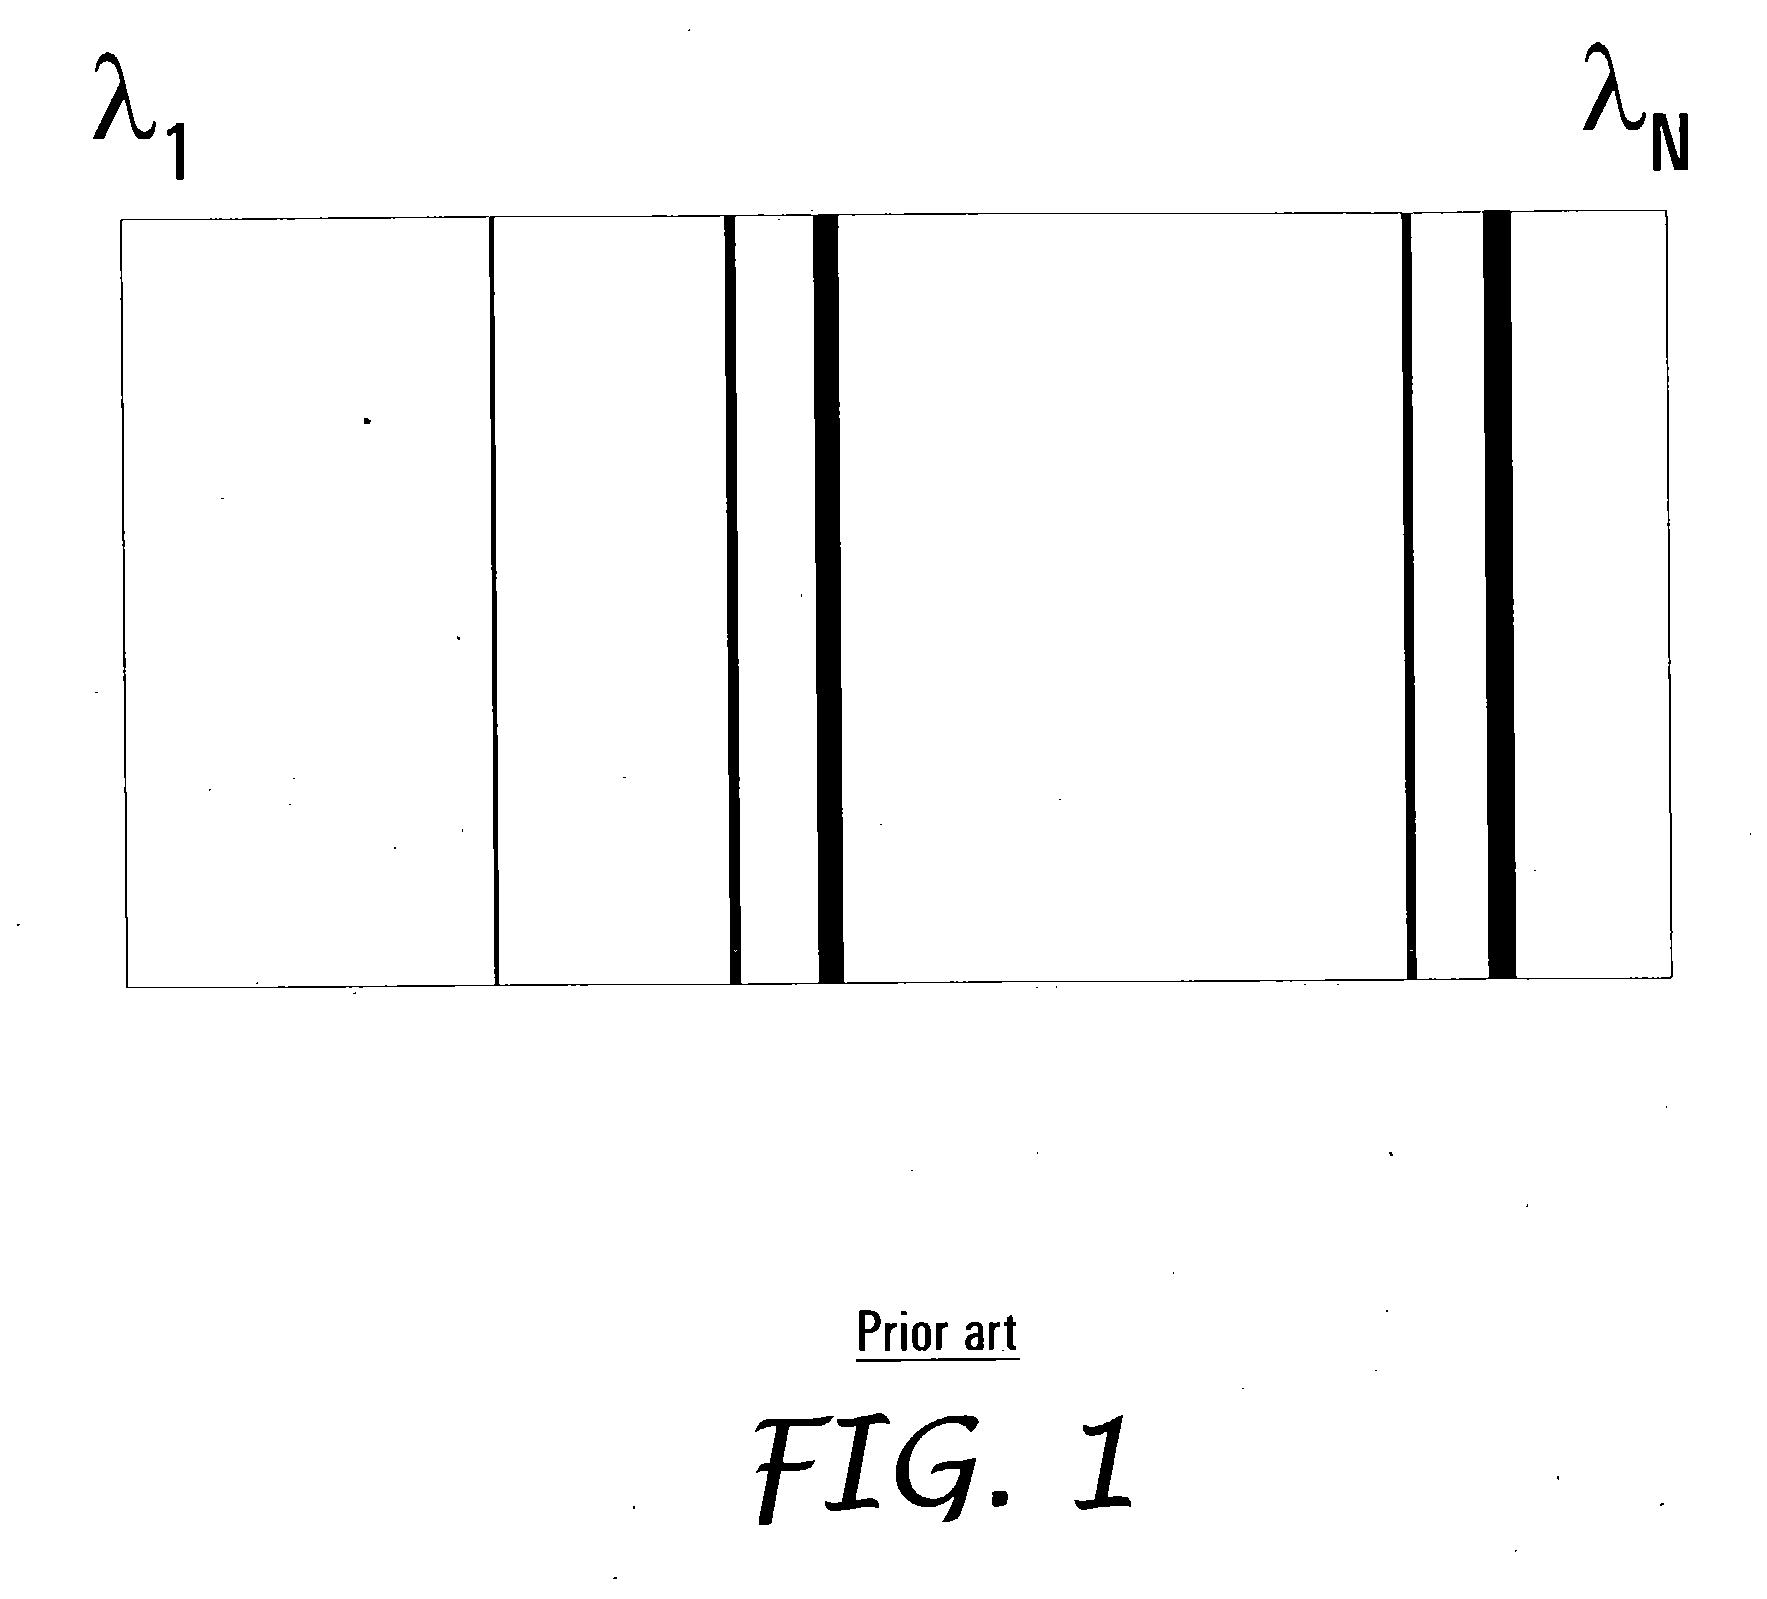 Apparatus and method for enhancing dynamic range of charge coupled device-based spectrograph